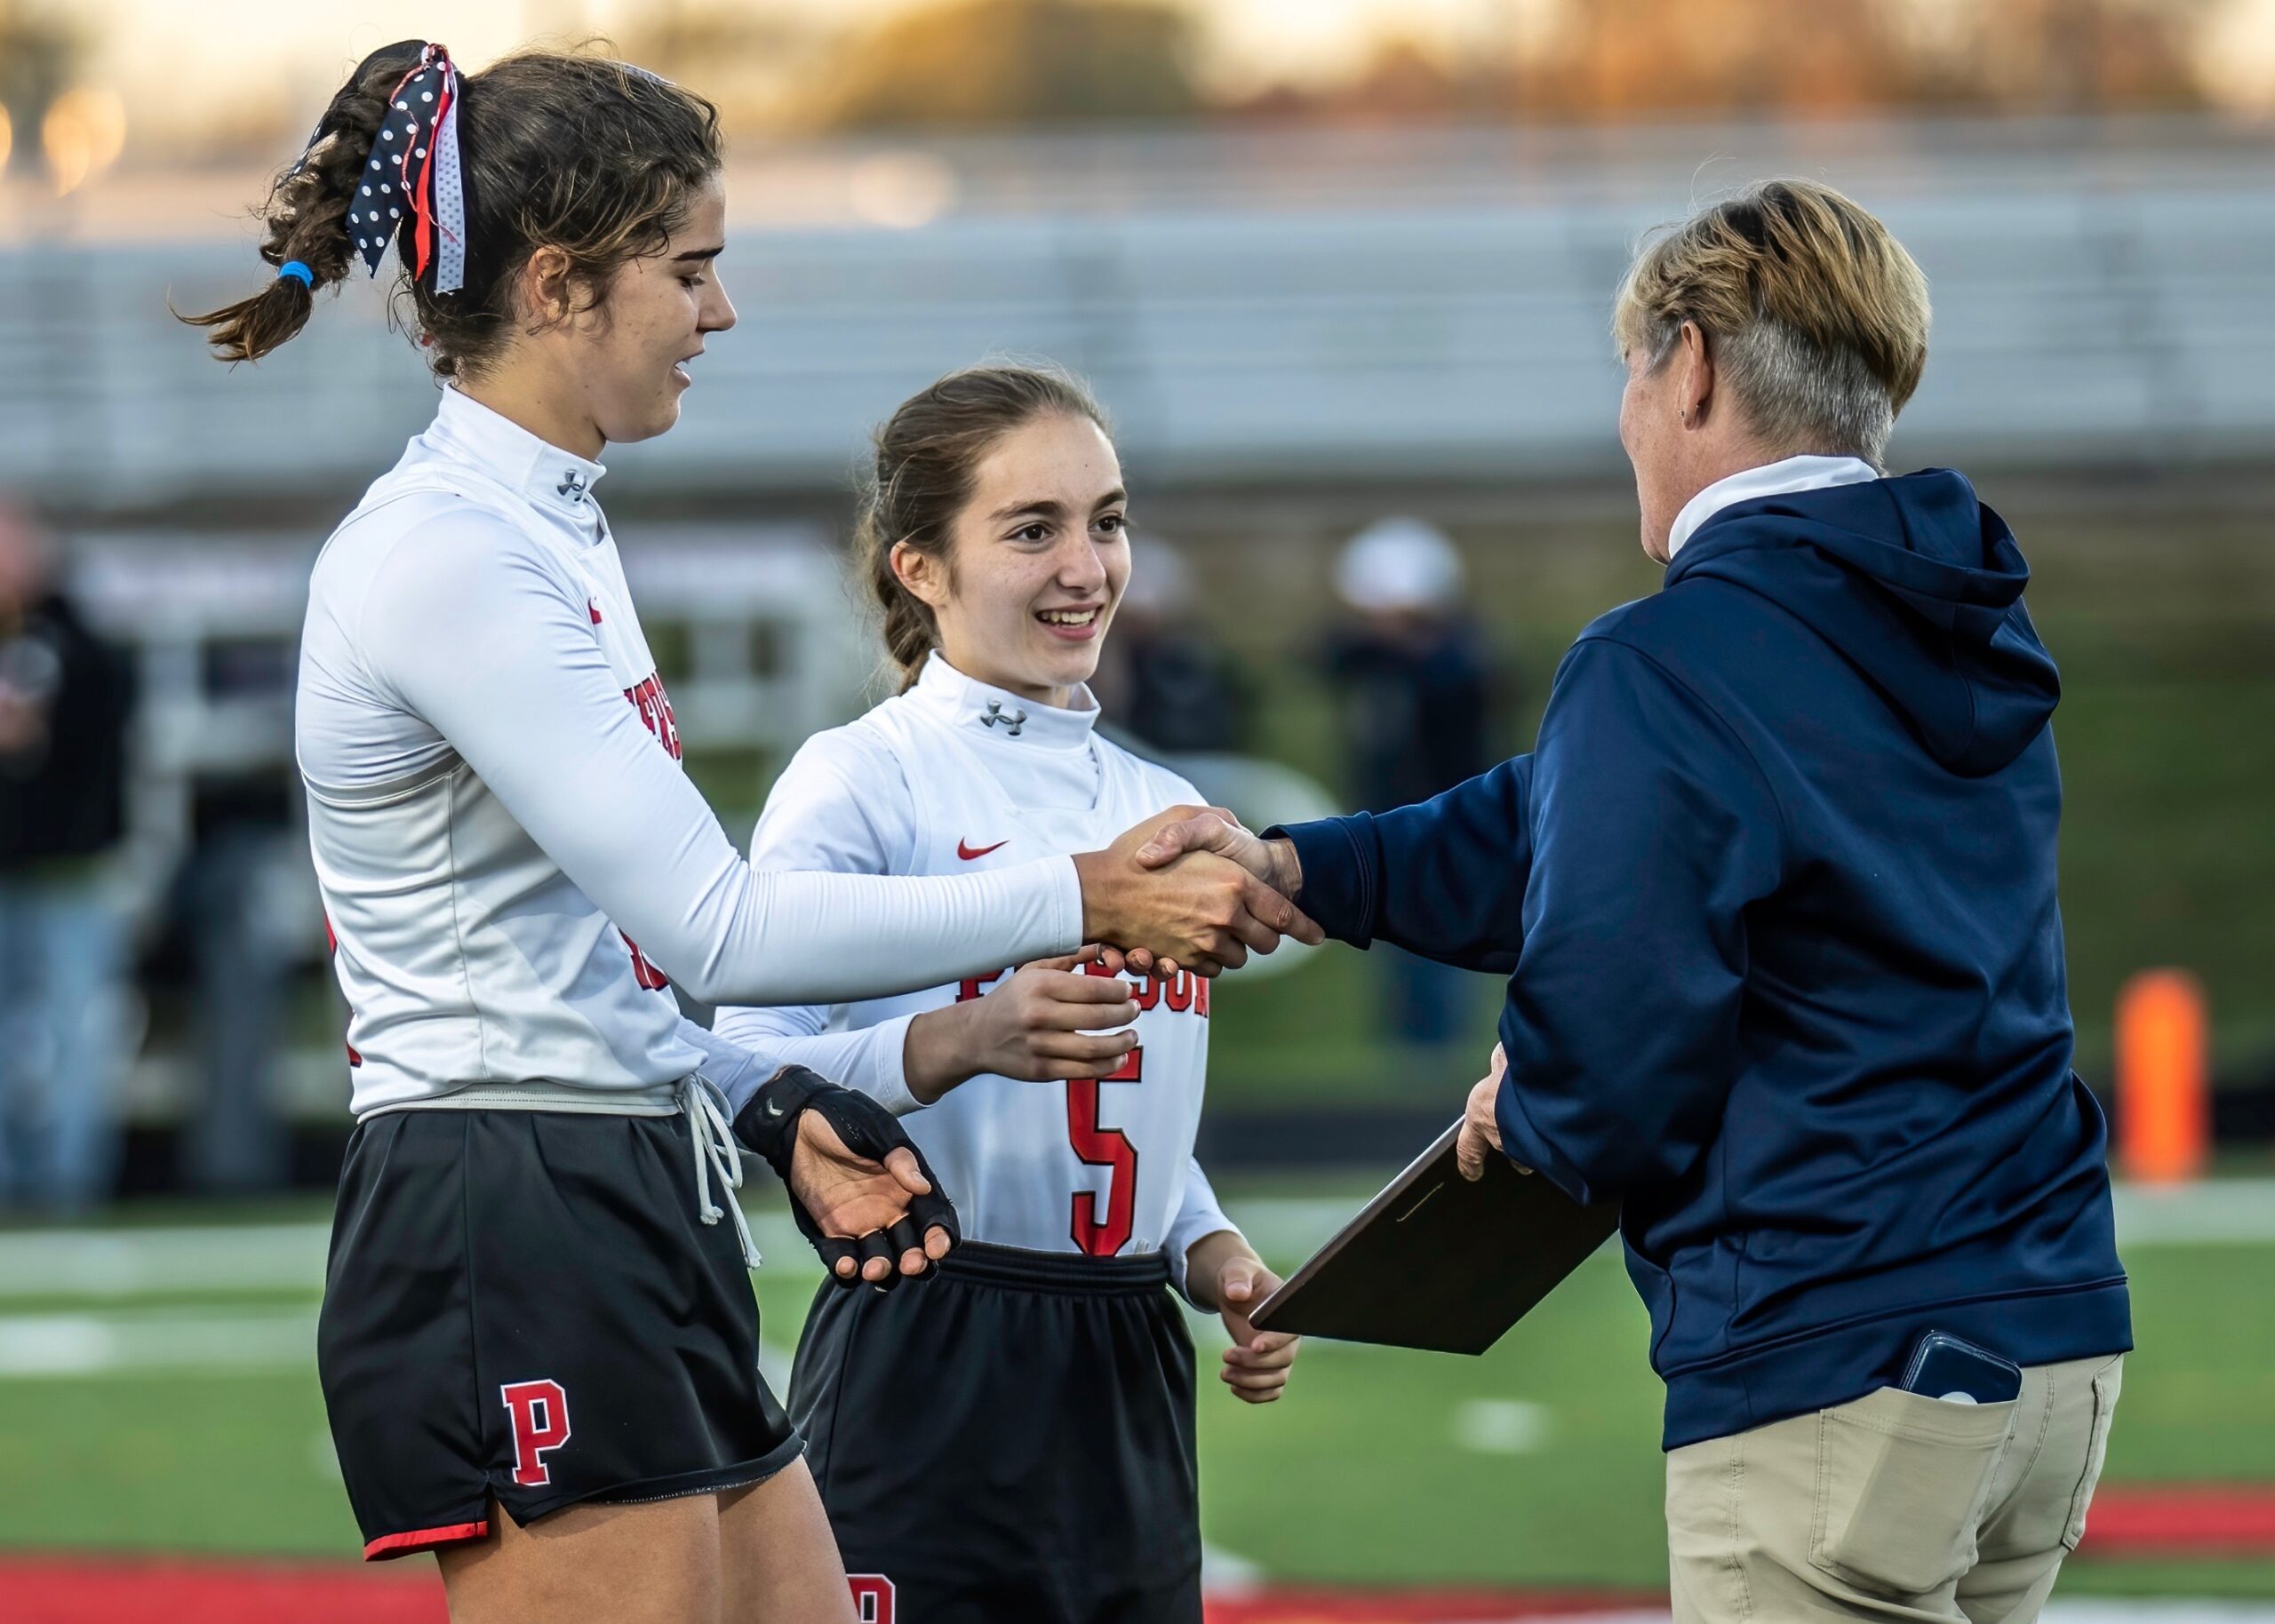 Meredith Spolarich and Mia Gangemi receive the Suffolk County Class C championship plaque from Section XI field hockey chairperson Deb Ferry. MARIANNE BARNETT